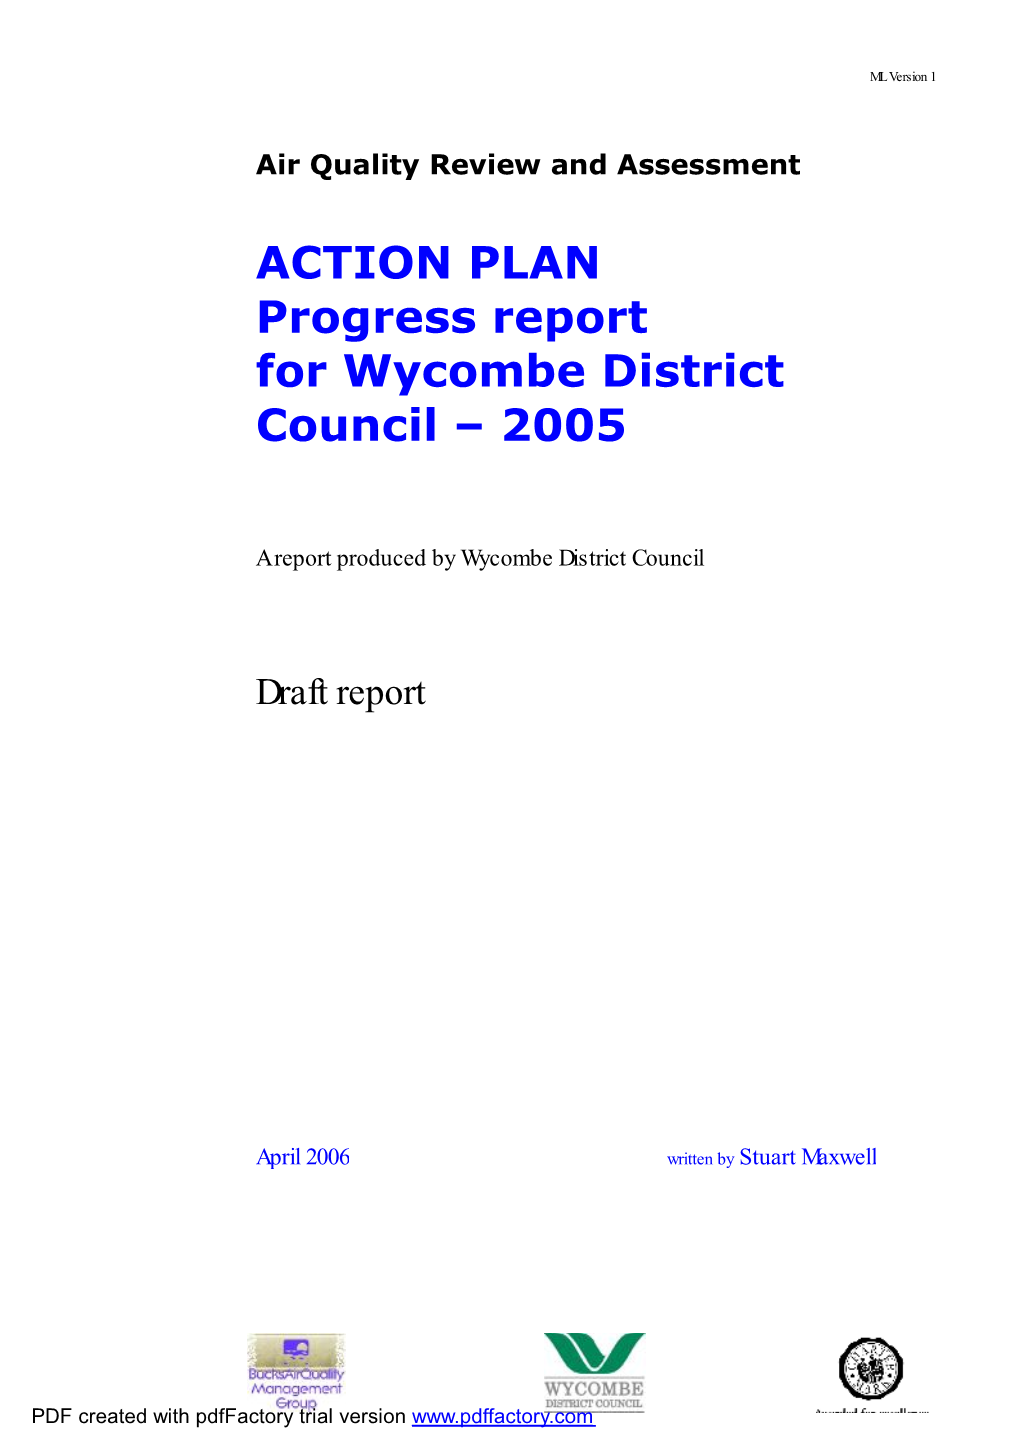 Wycombe Air Quality Action Plan Progress Report 2005